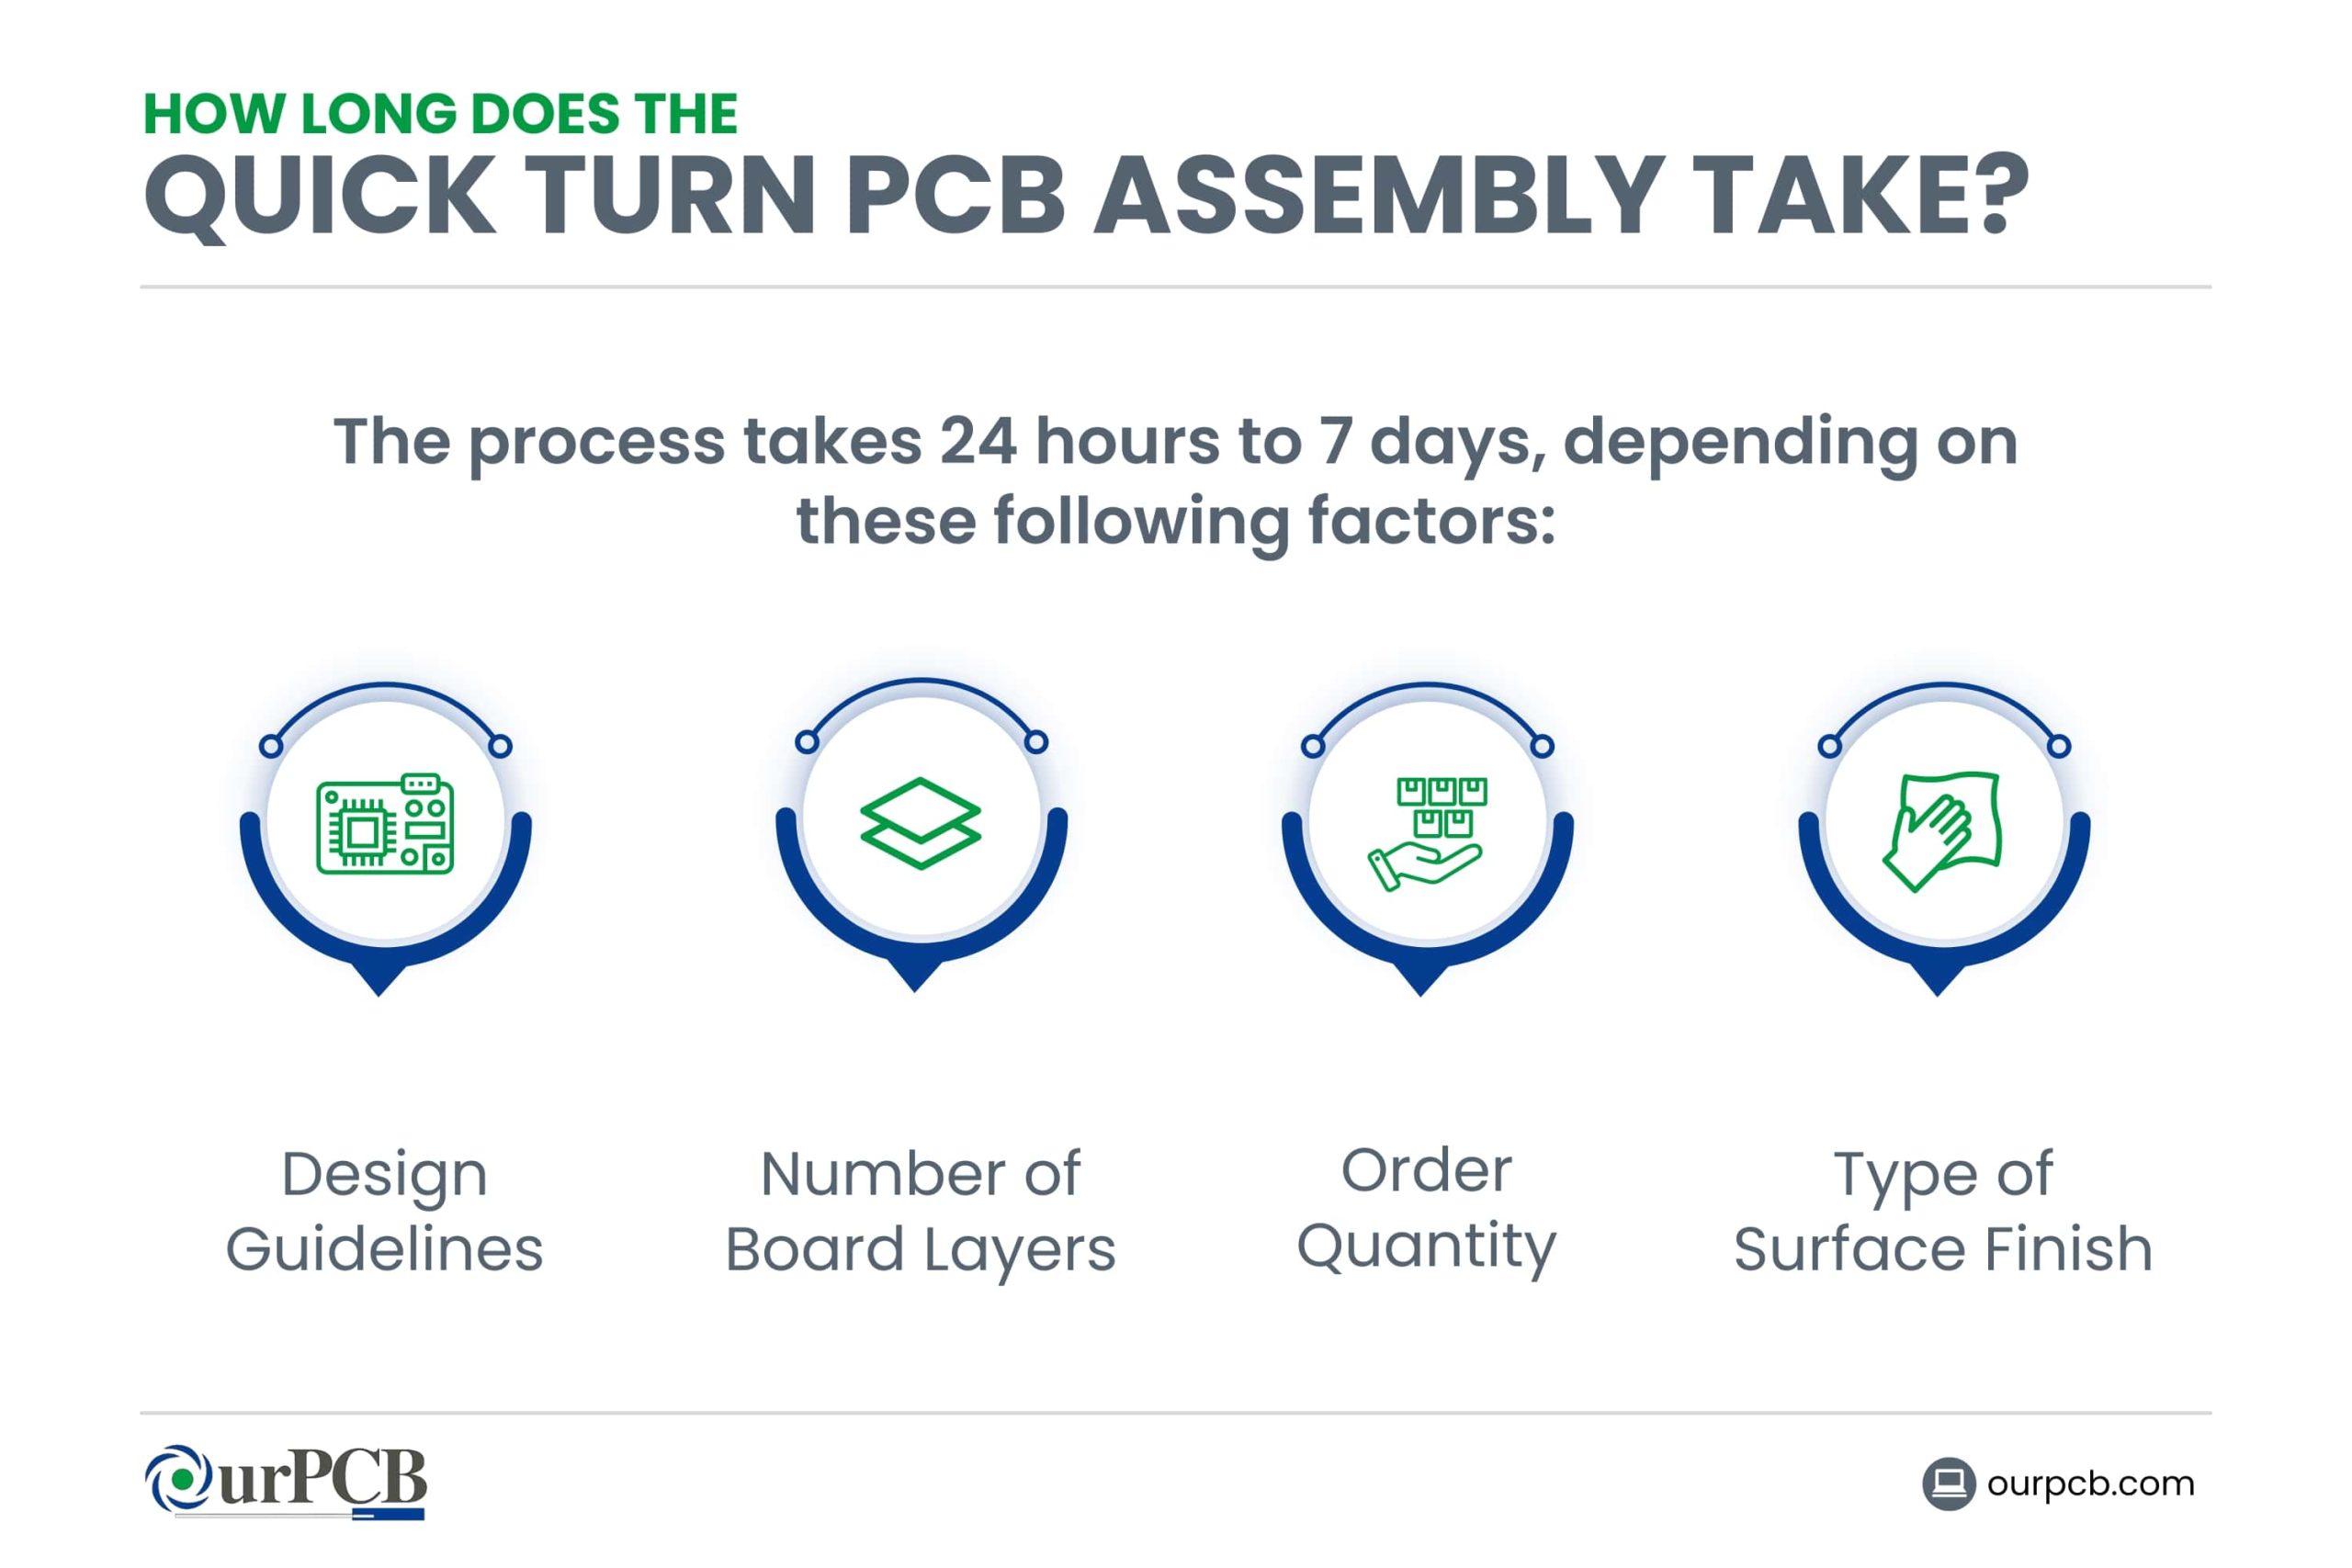 How Long Does Quick turn PCB Assembly Take?